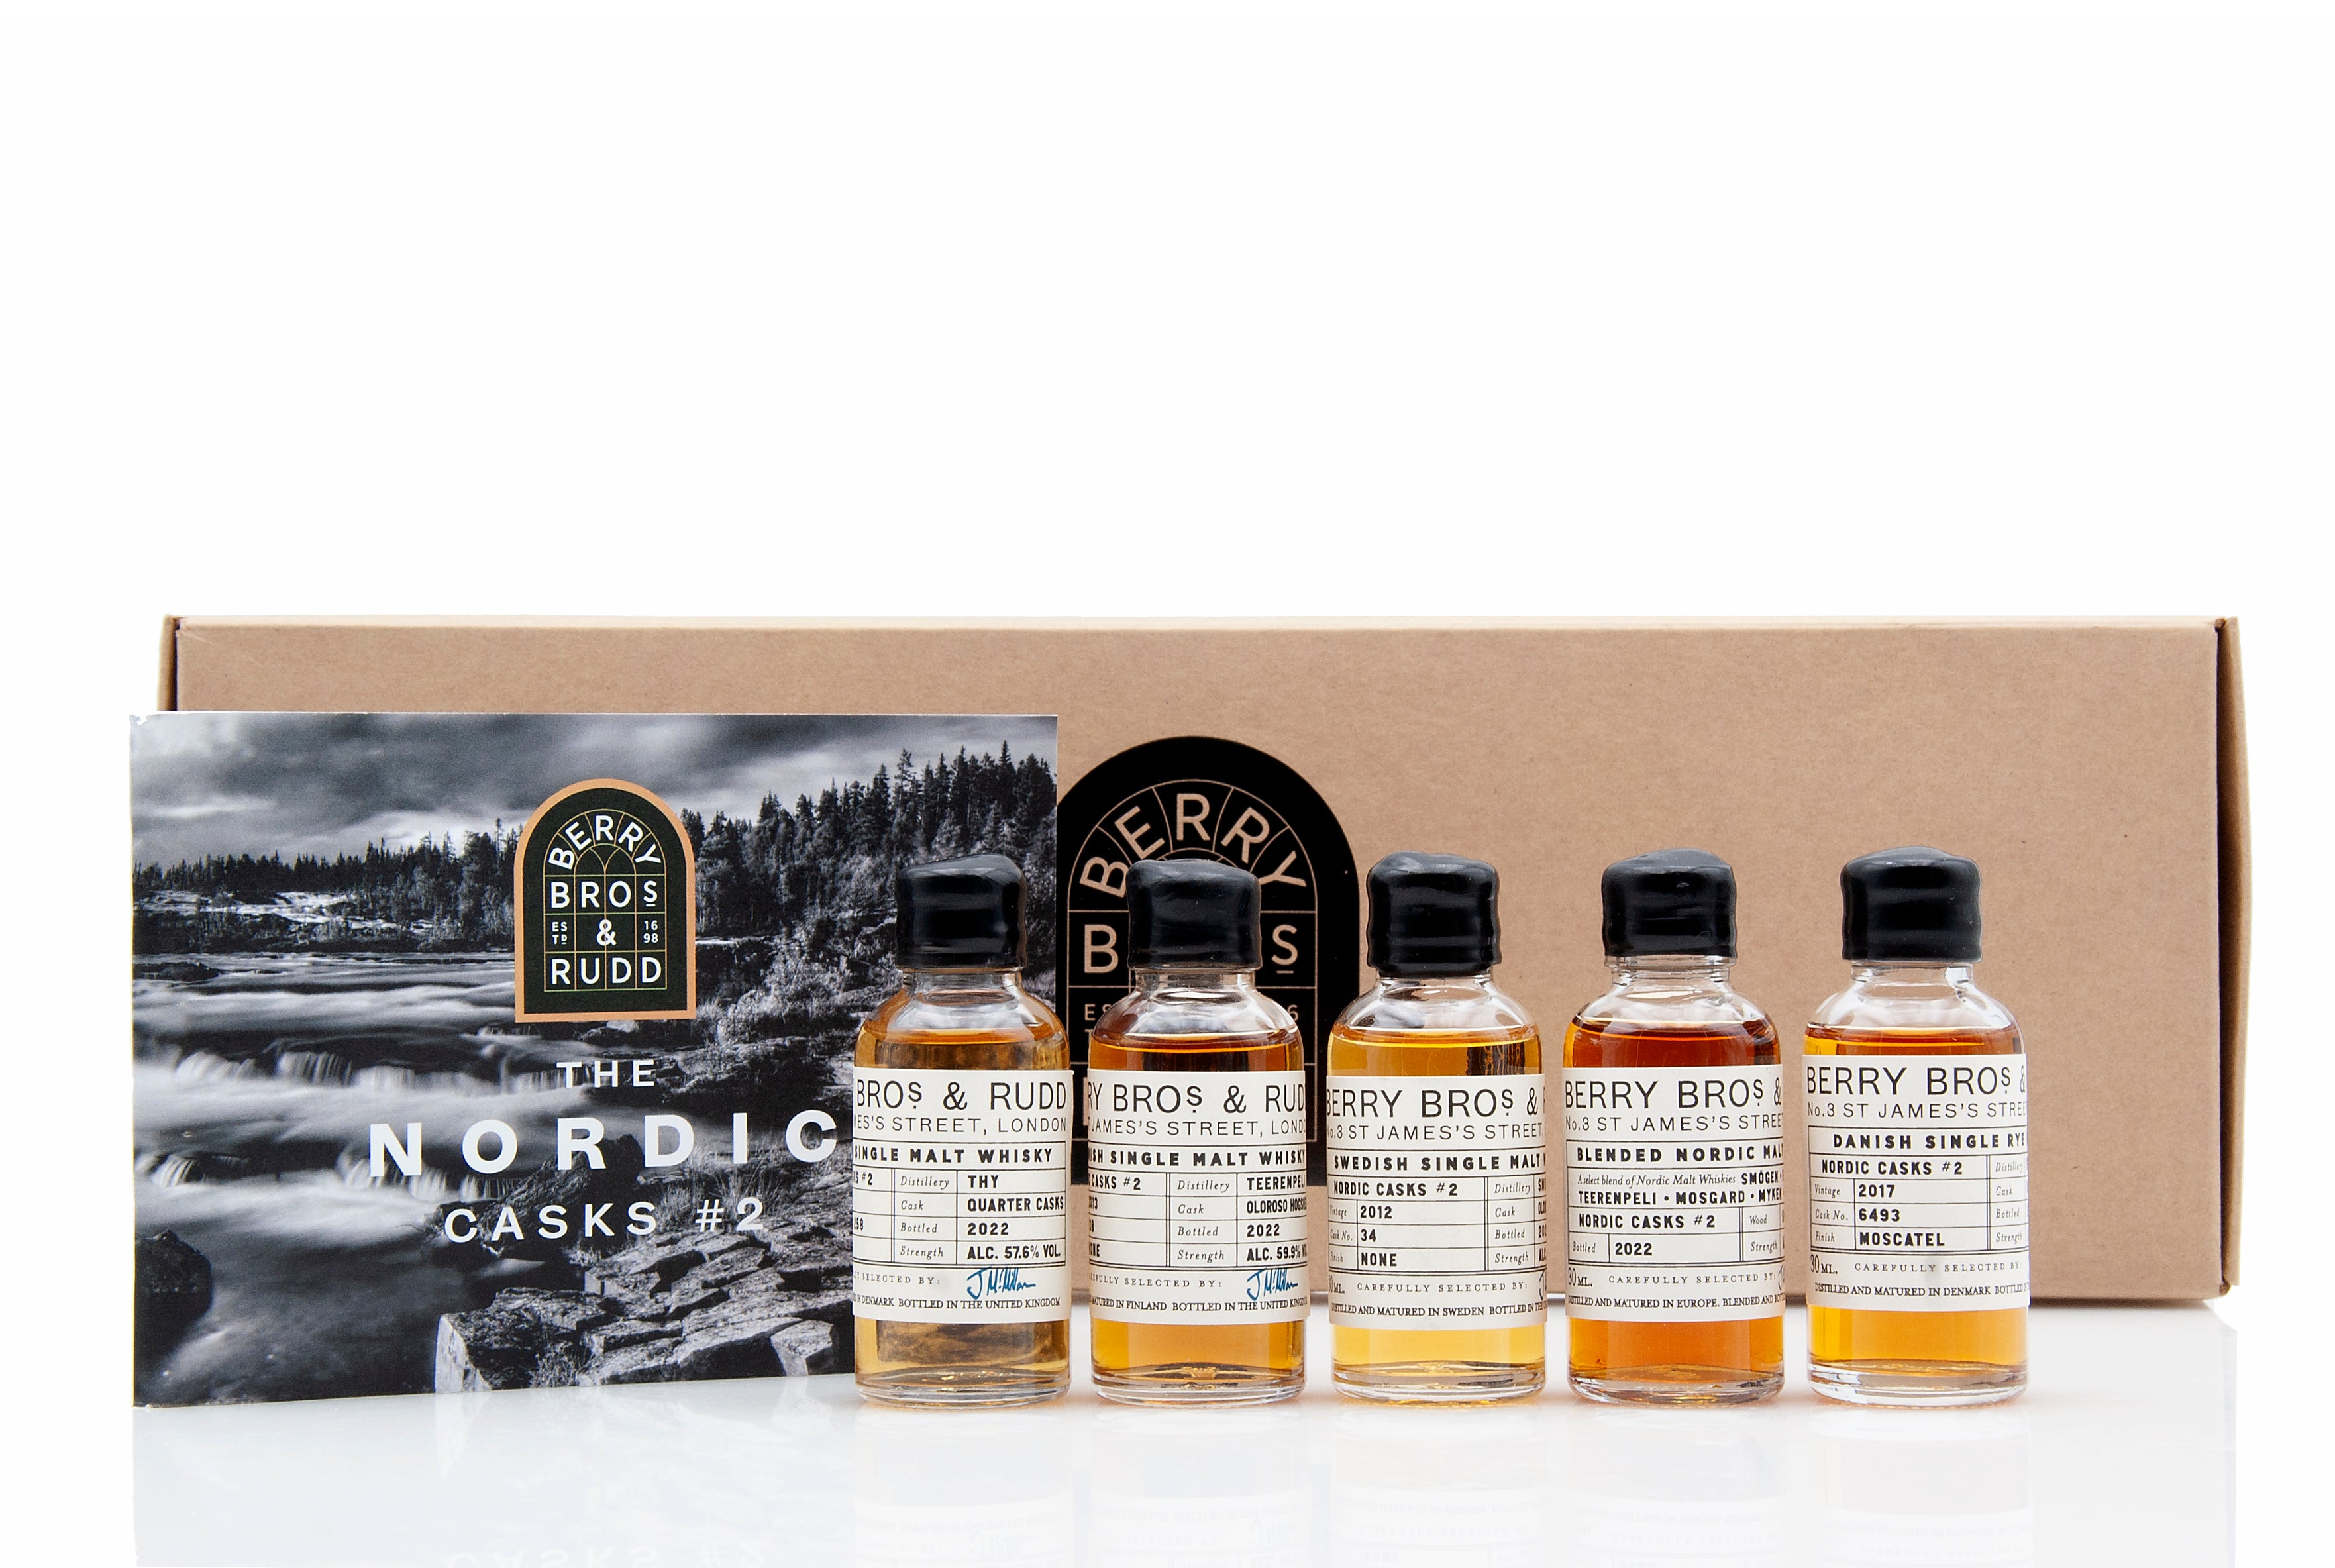 Berry Bros & Rudd - The Nordic Casks #2 Tasting Pack | 5 x 3cl